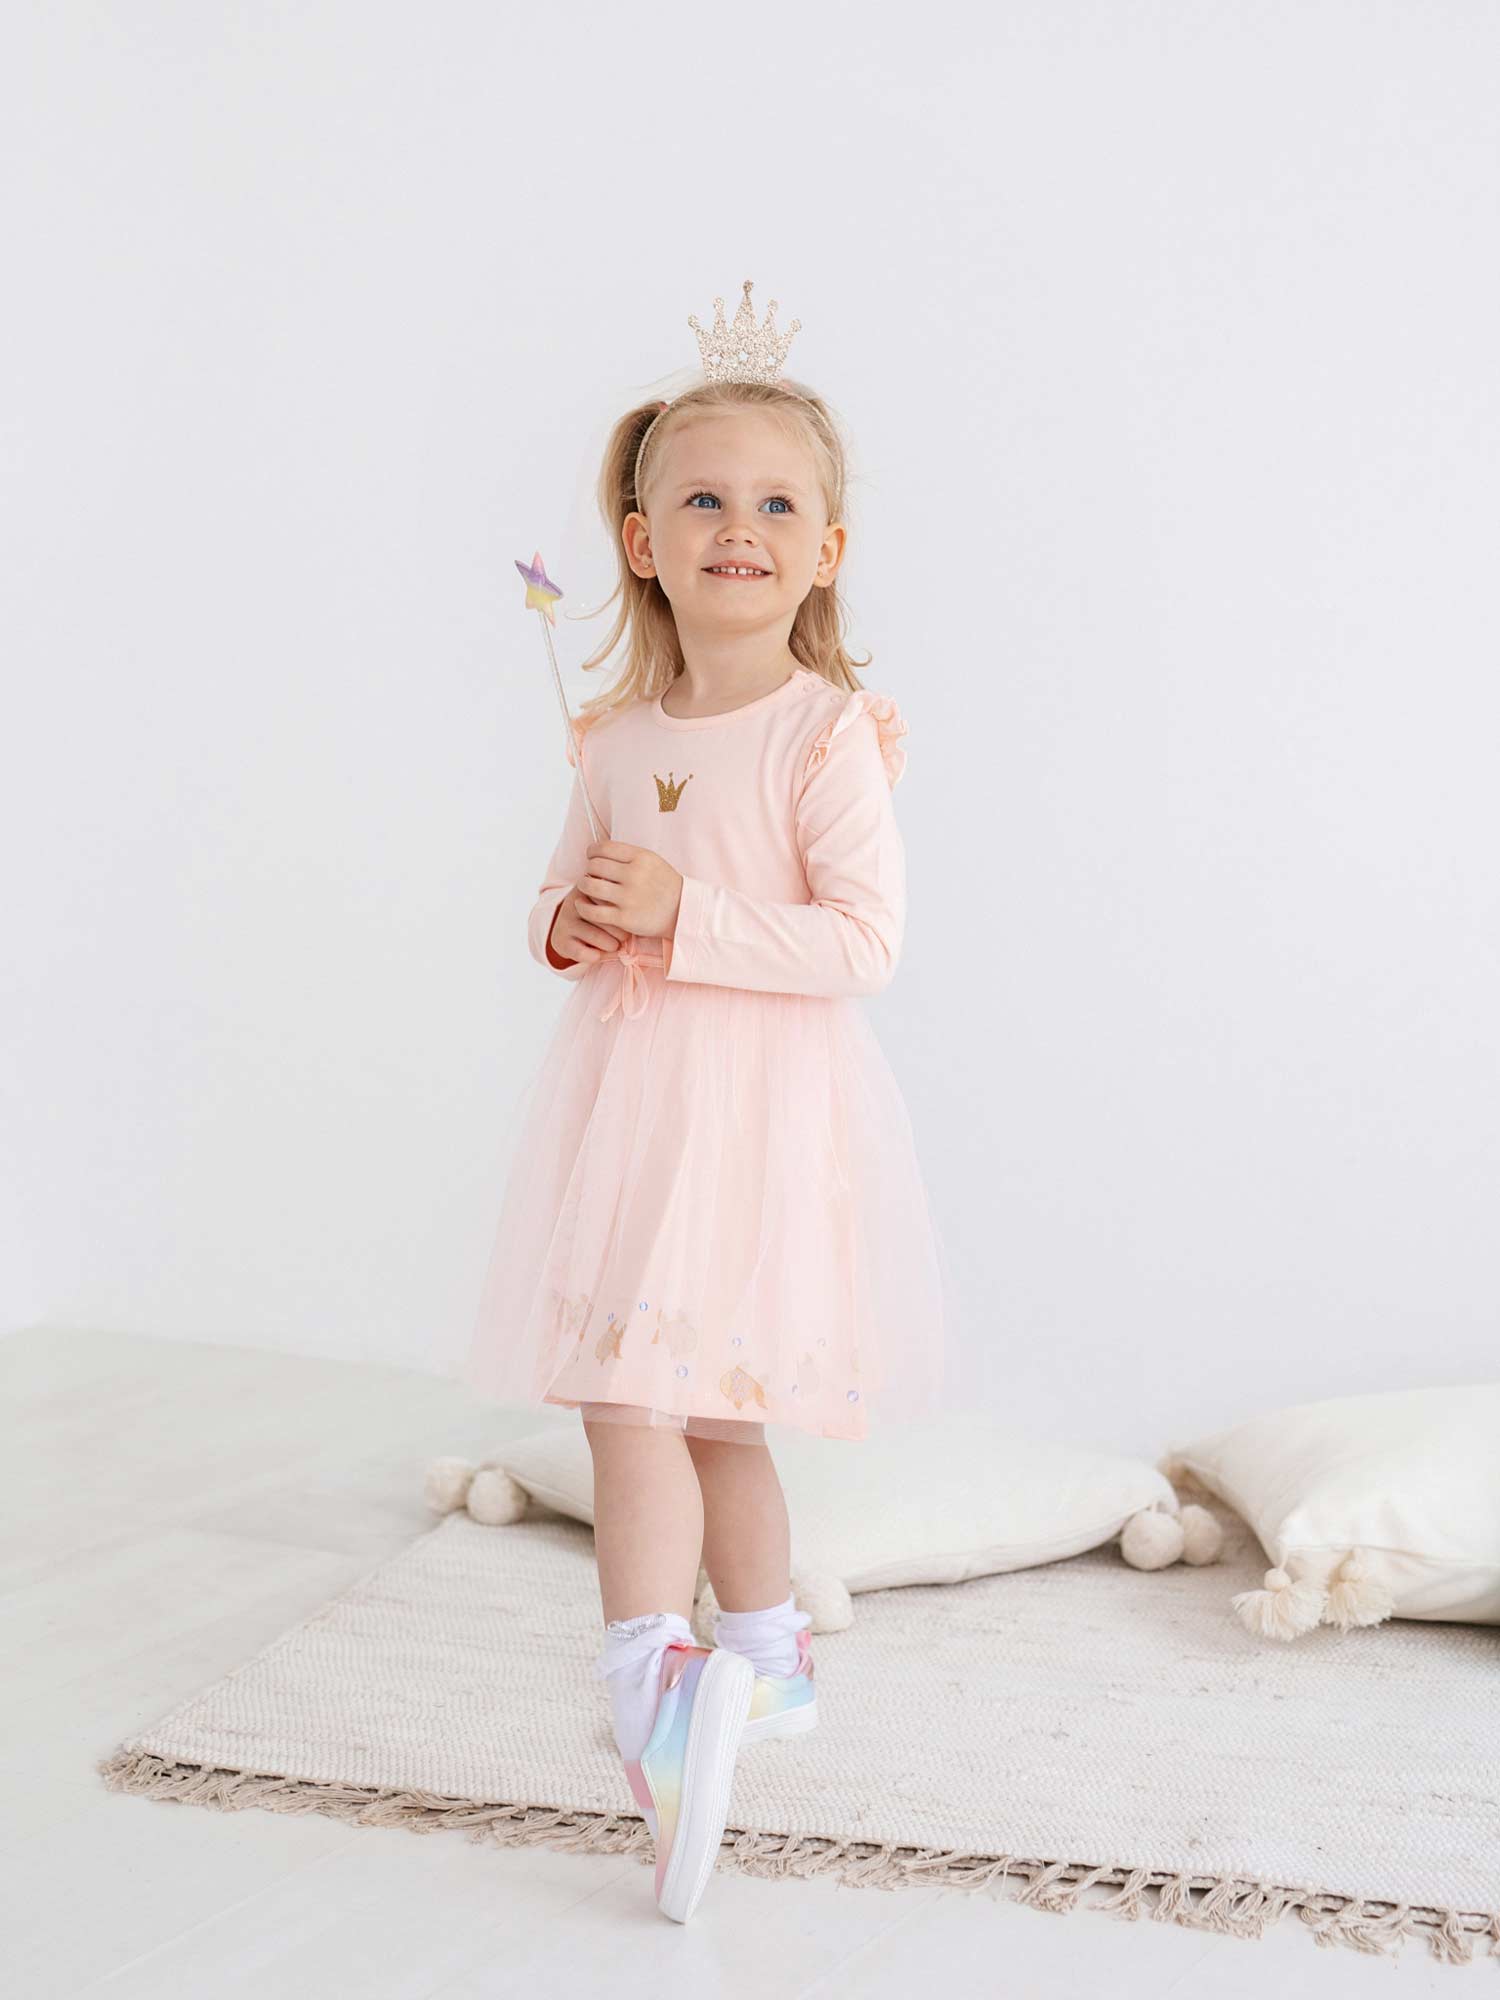 Perfect for all day wear or travelling, the Baby Dress Gold Fish 313 is sure to make your mini fashionista look her best all day!